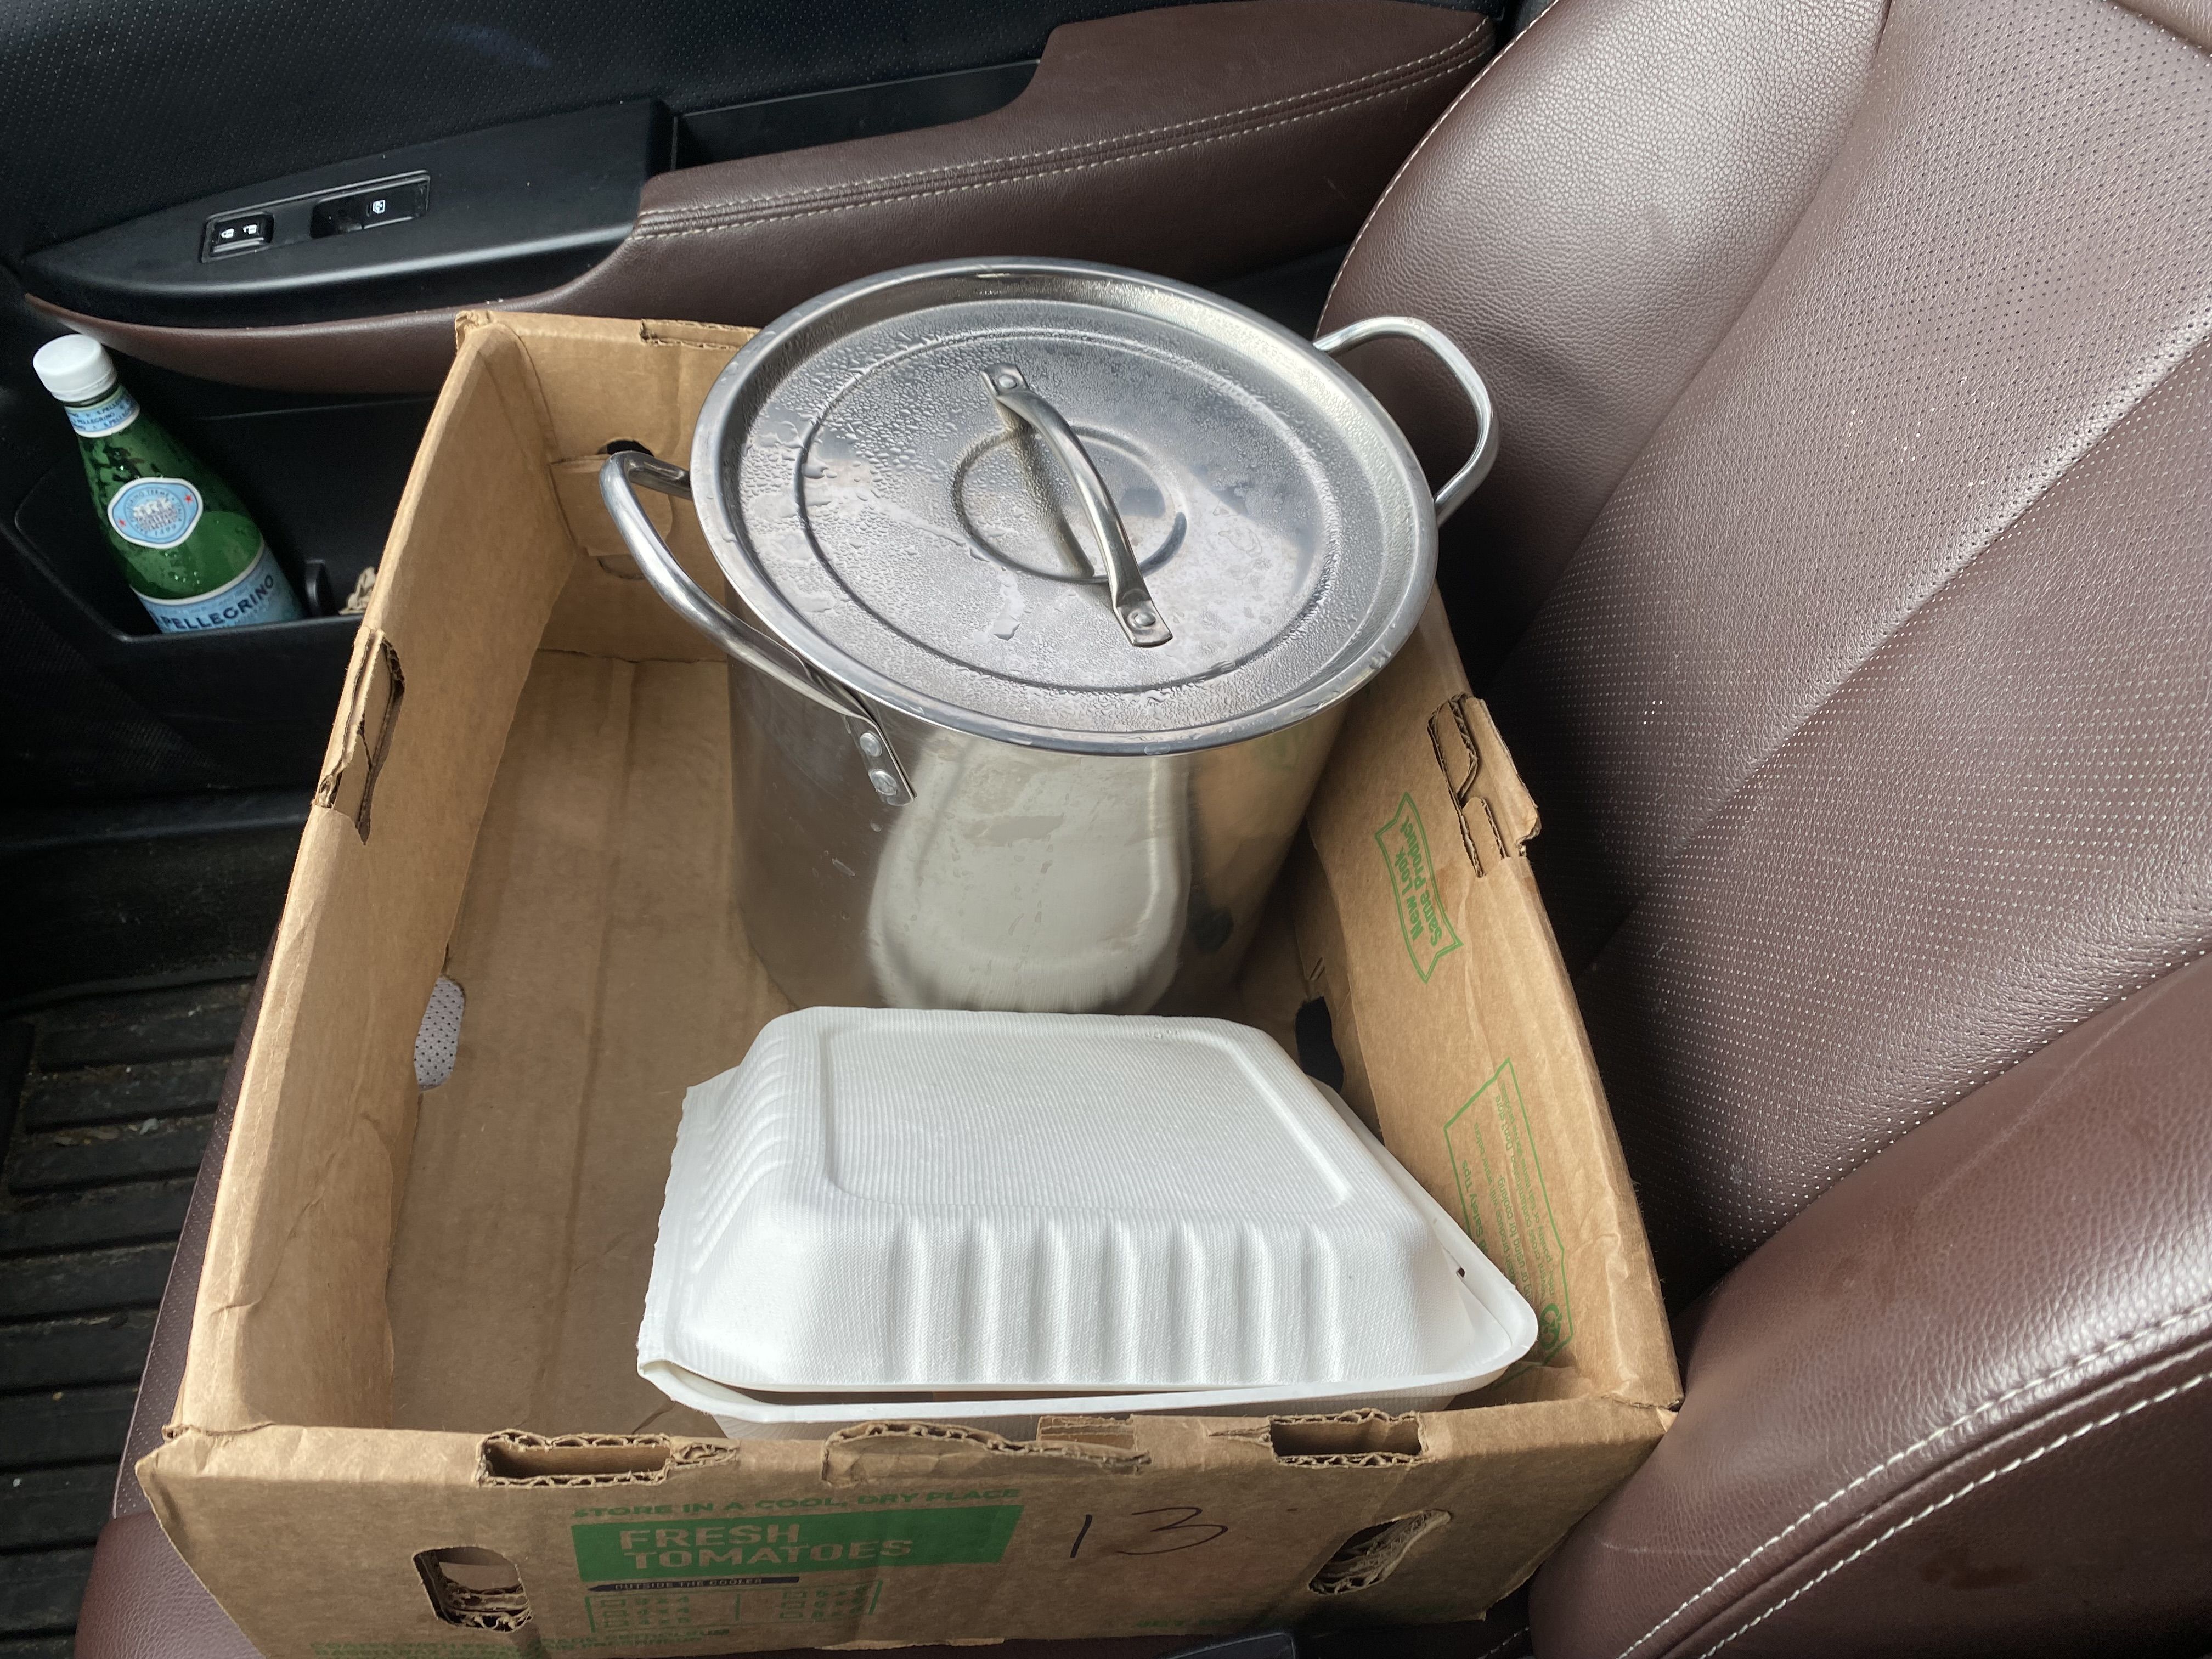 A stainless steel pot next to a white takeout container, both inside a brown box on the seat of a car.